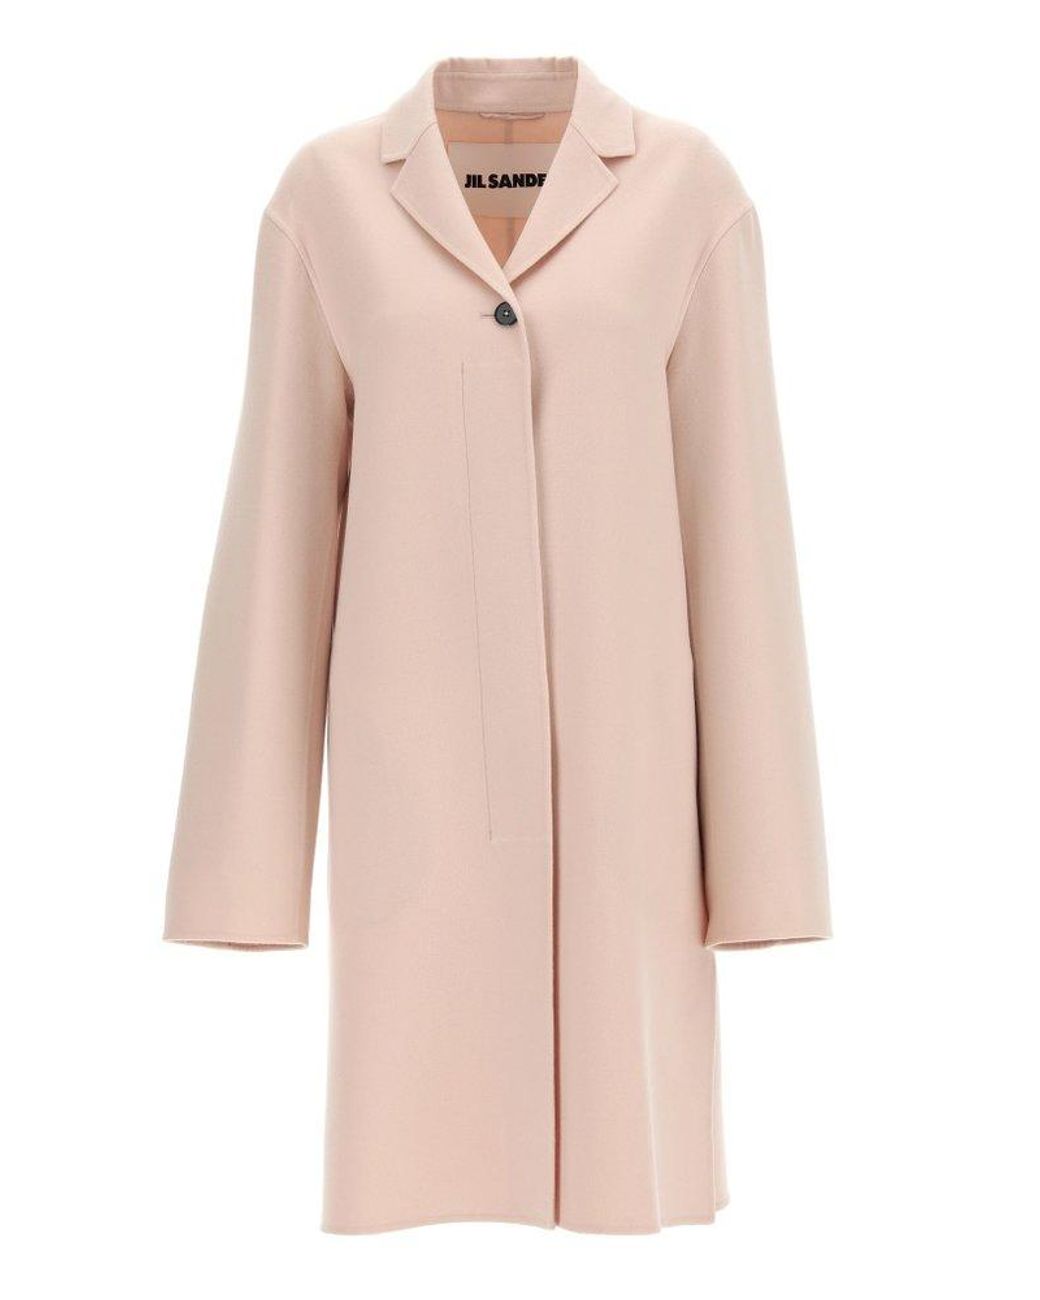 Jil Sander Cashmere Single-breasted Mid-length Coat in Pink | Lyst